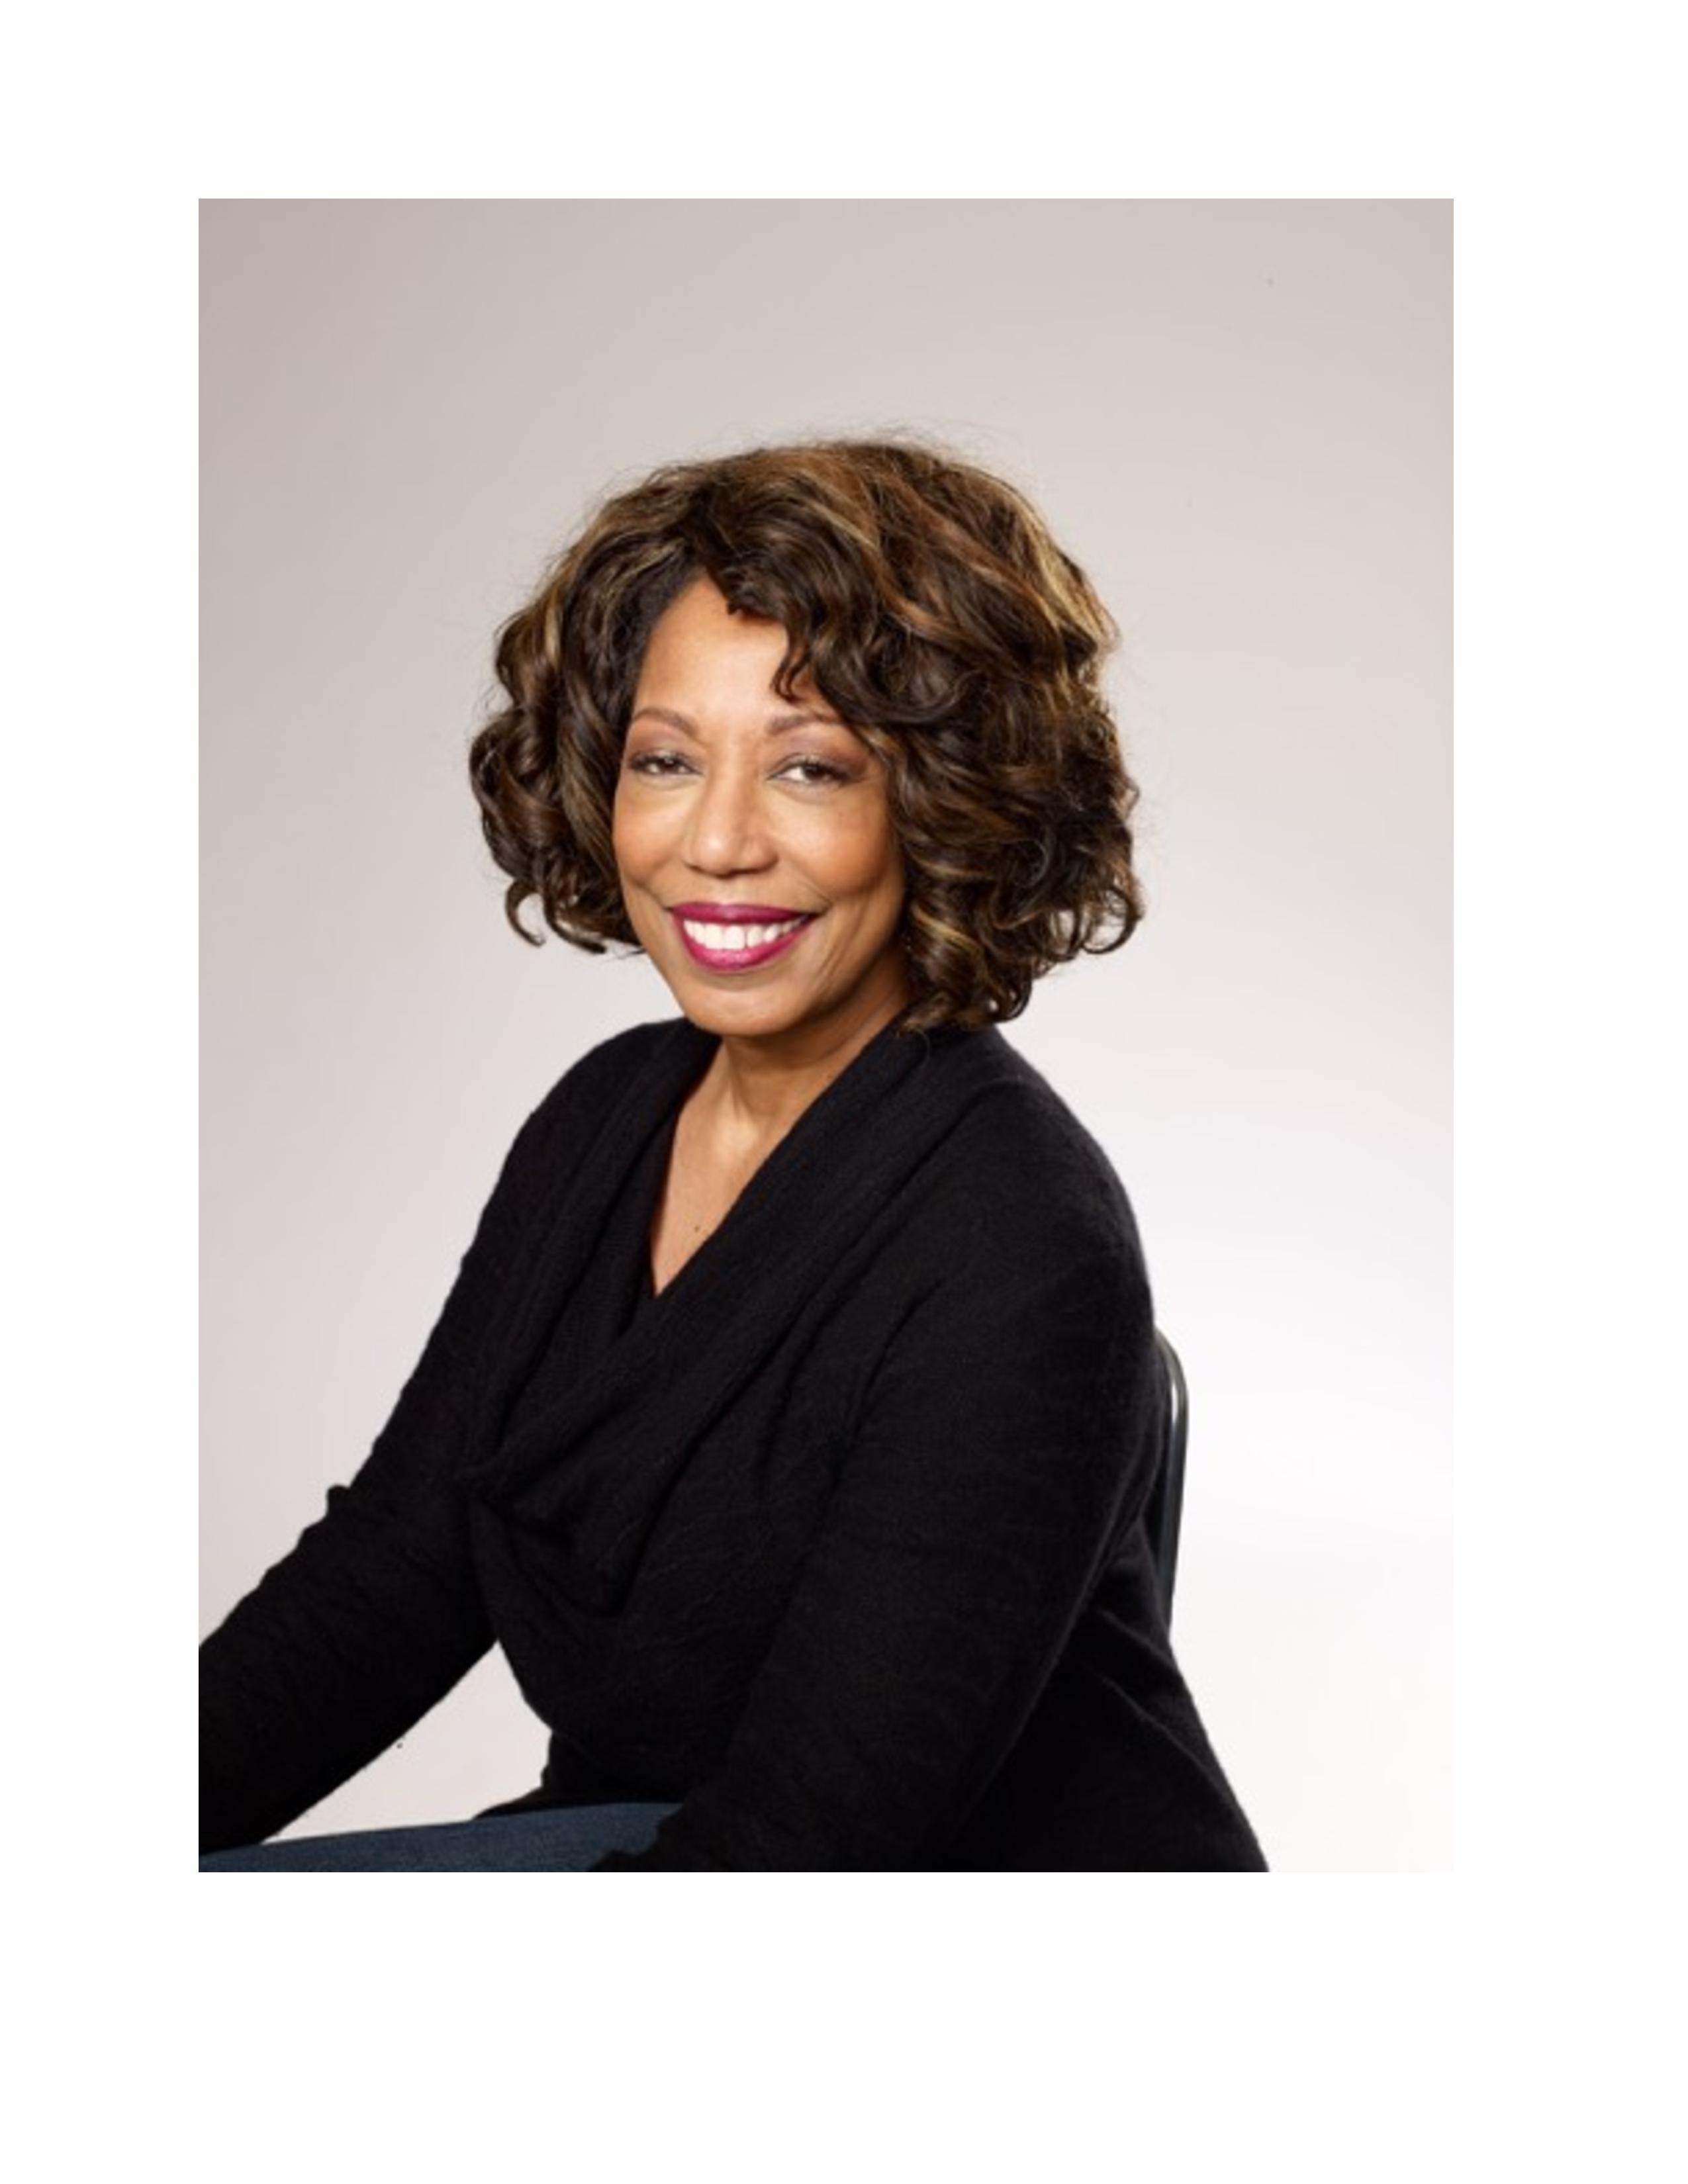 Denise Young Smith is the Fall Commencement speaker at GSU